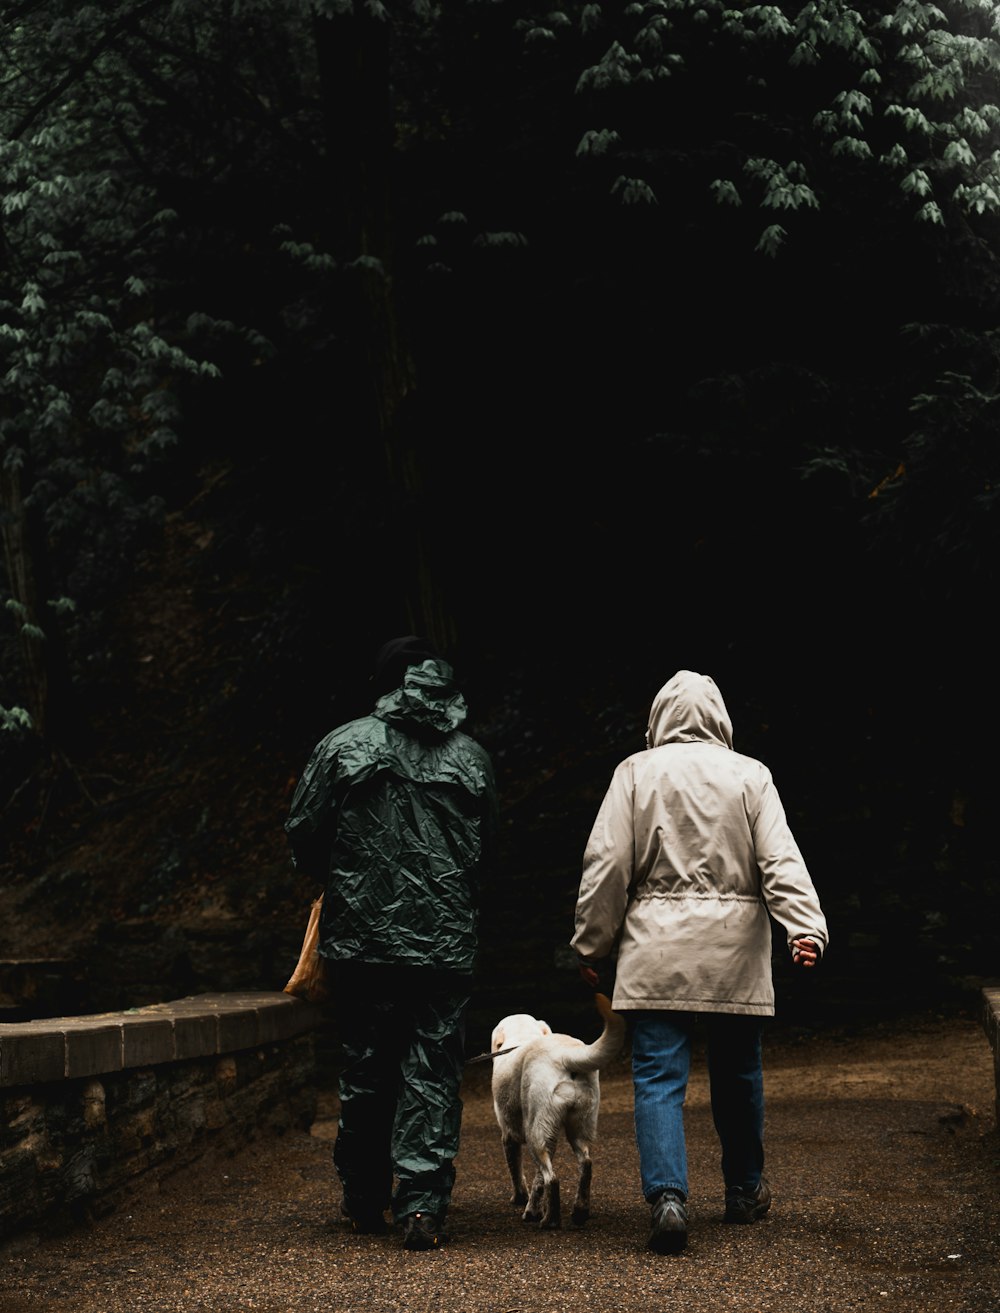 man and woman walking with dog